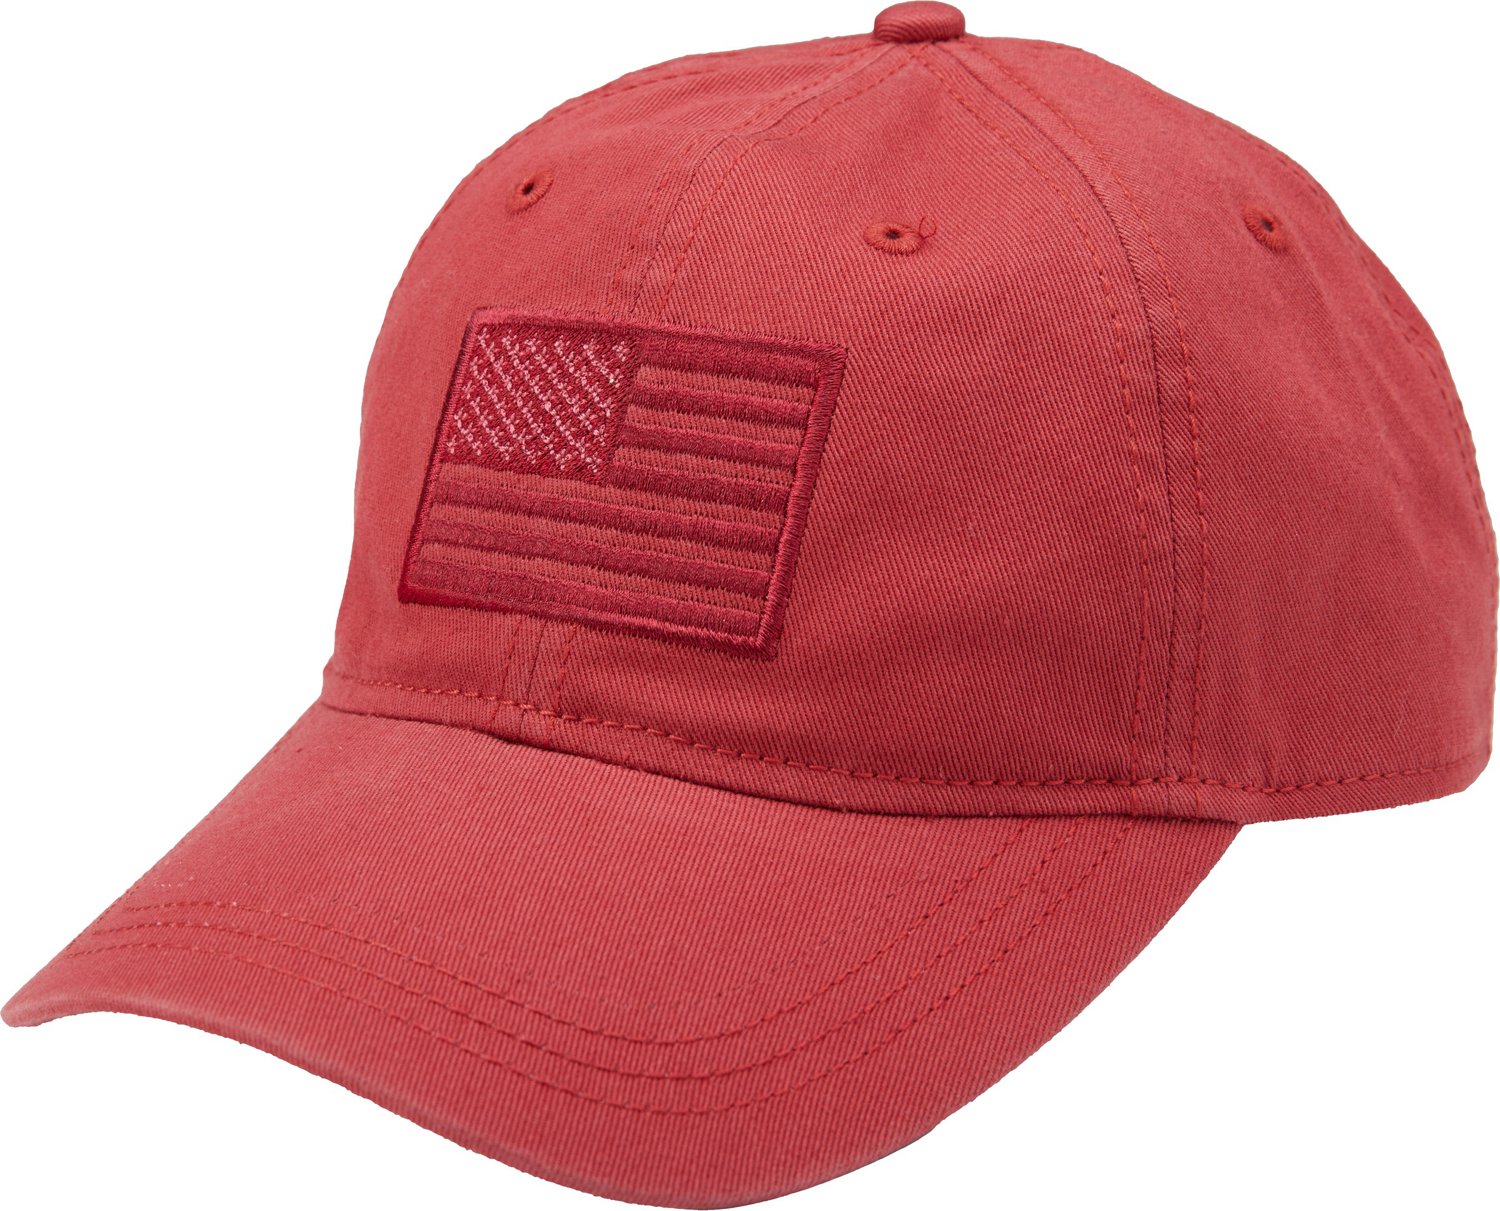 Academy Sports + Outdoors Men's Tonal American Flag Solid Twill Hat                                                             